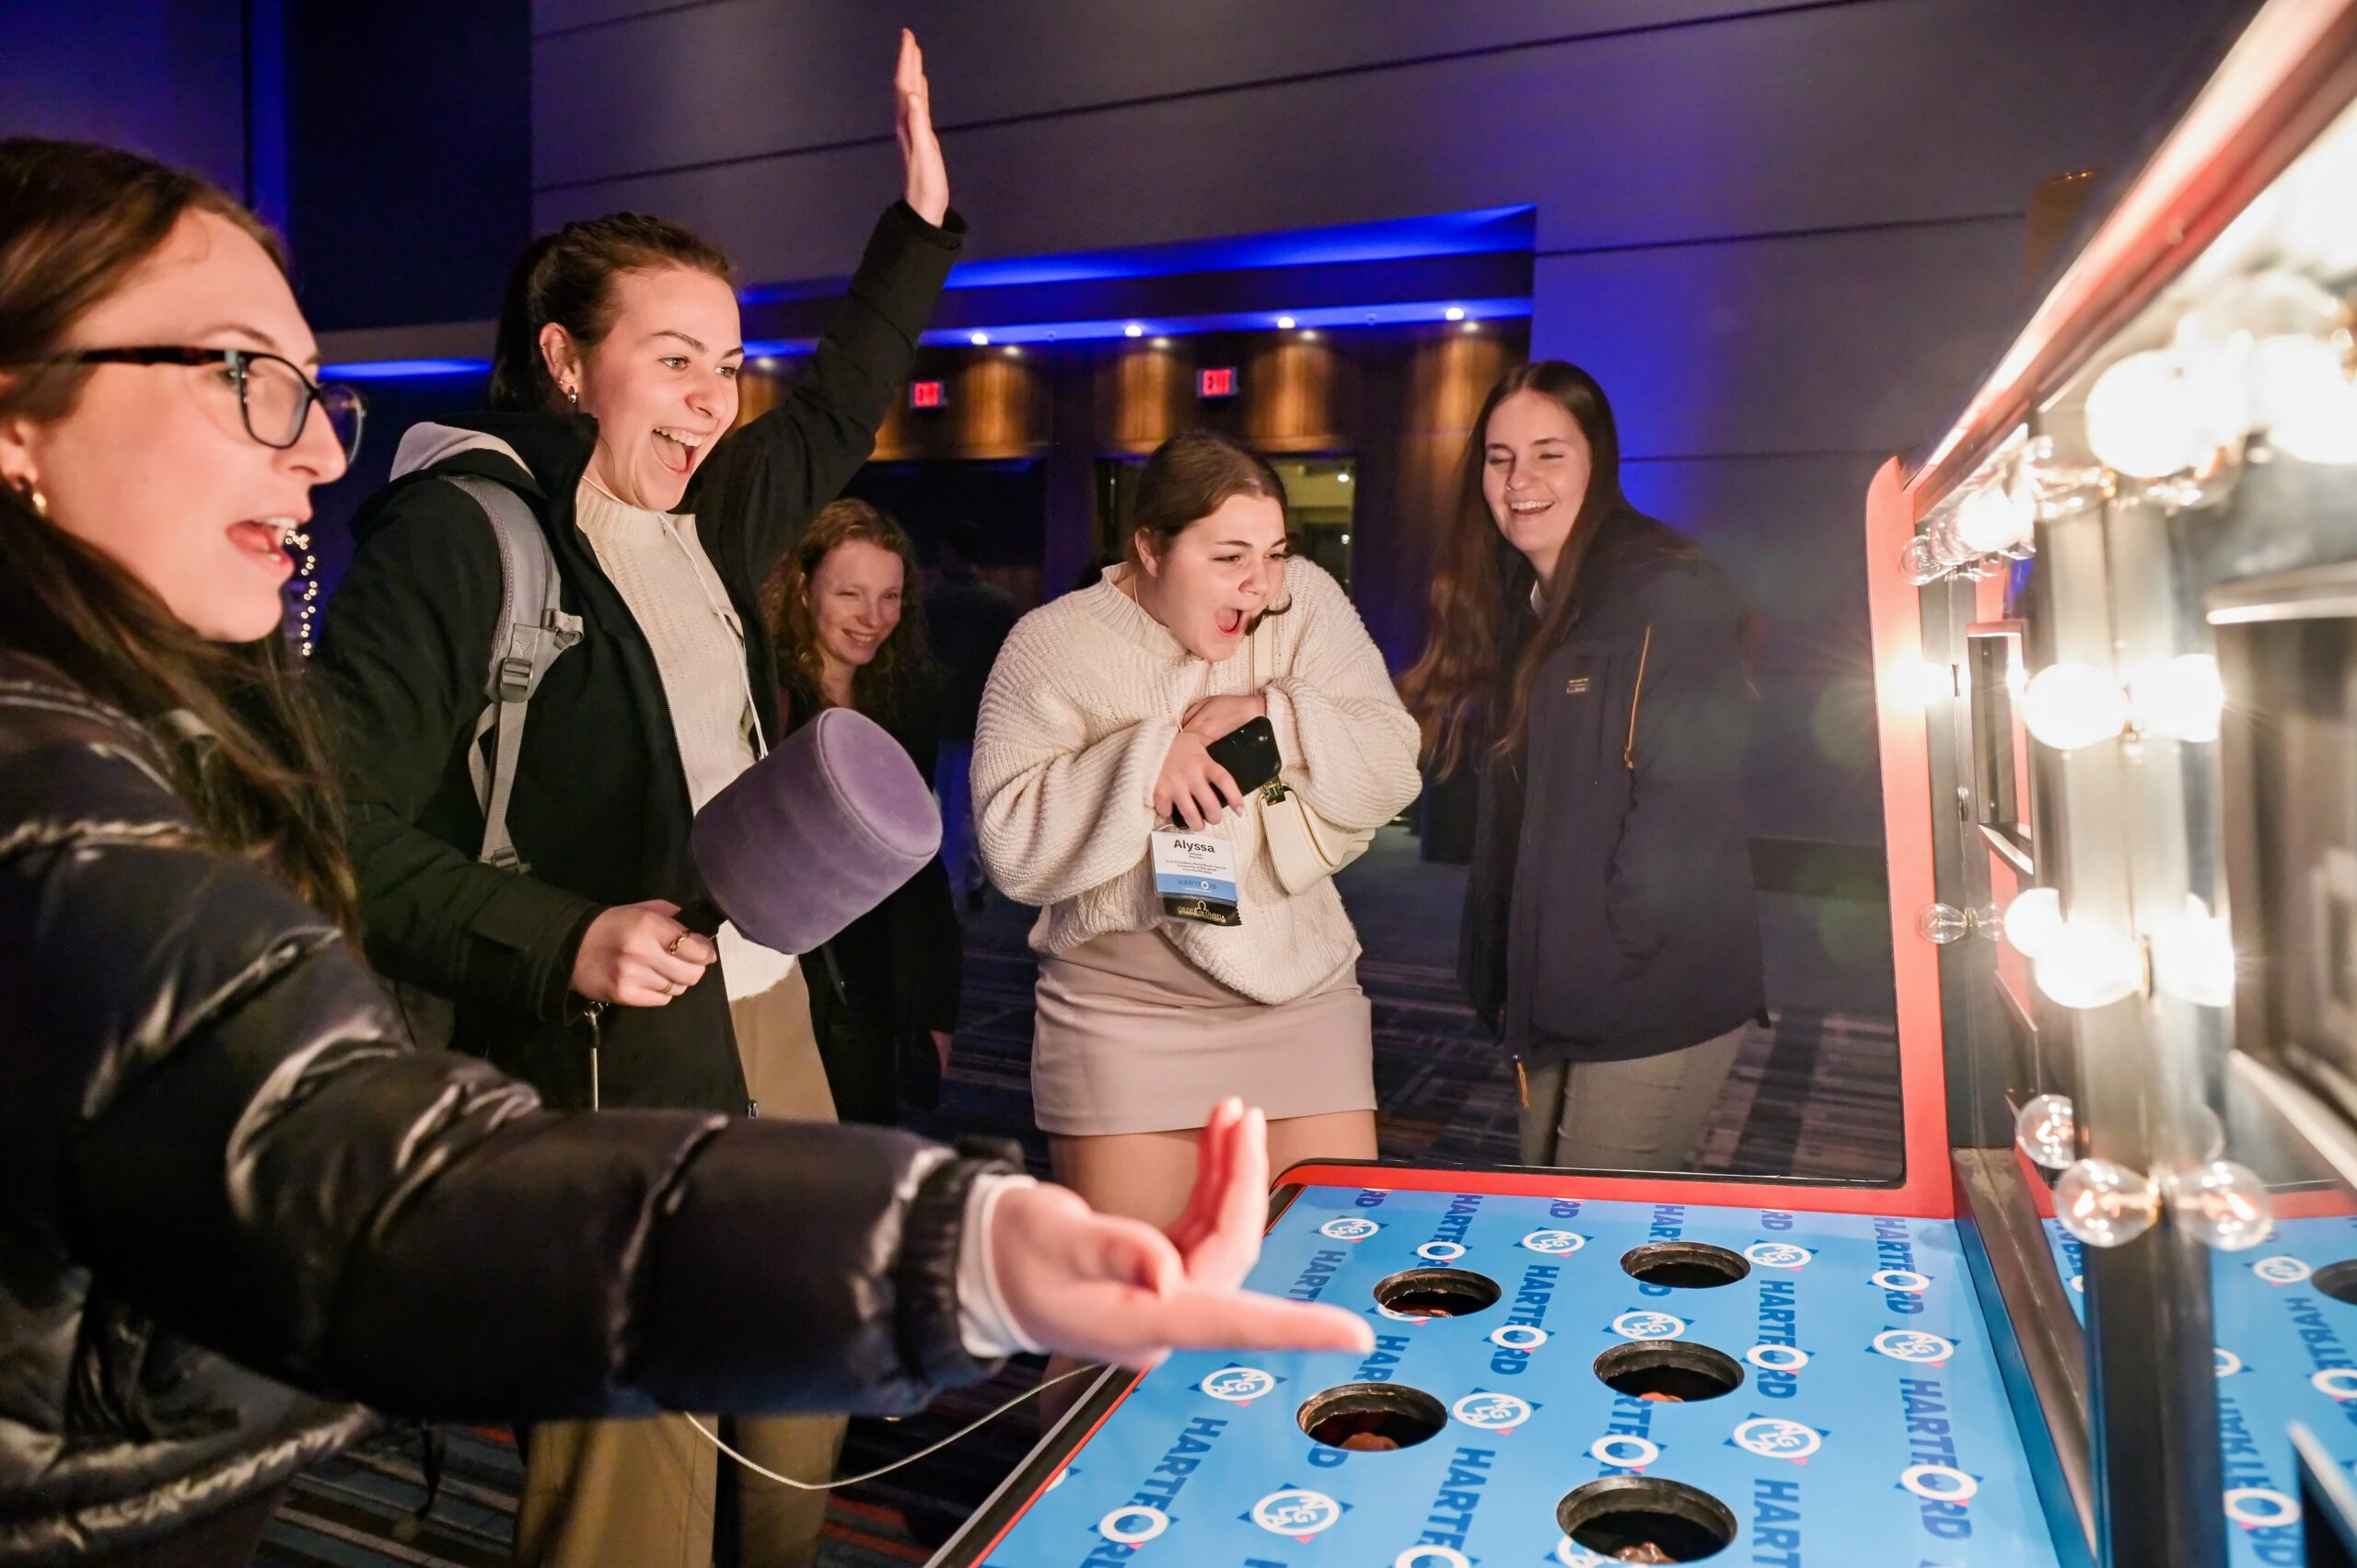 group of college students playing arcade whac-a-mole game